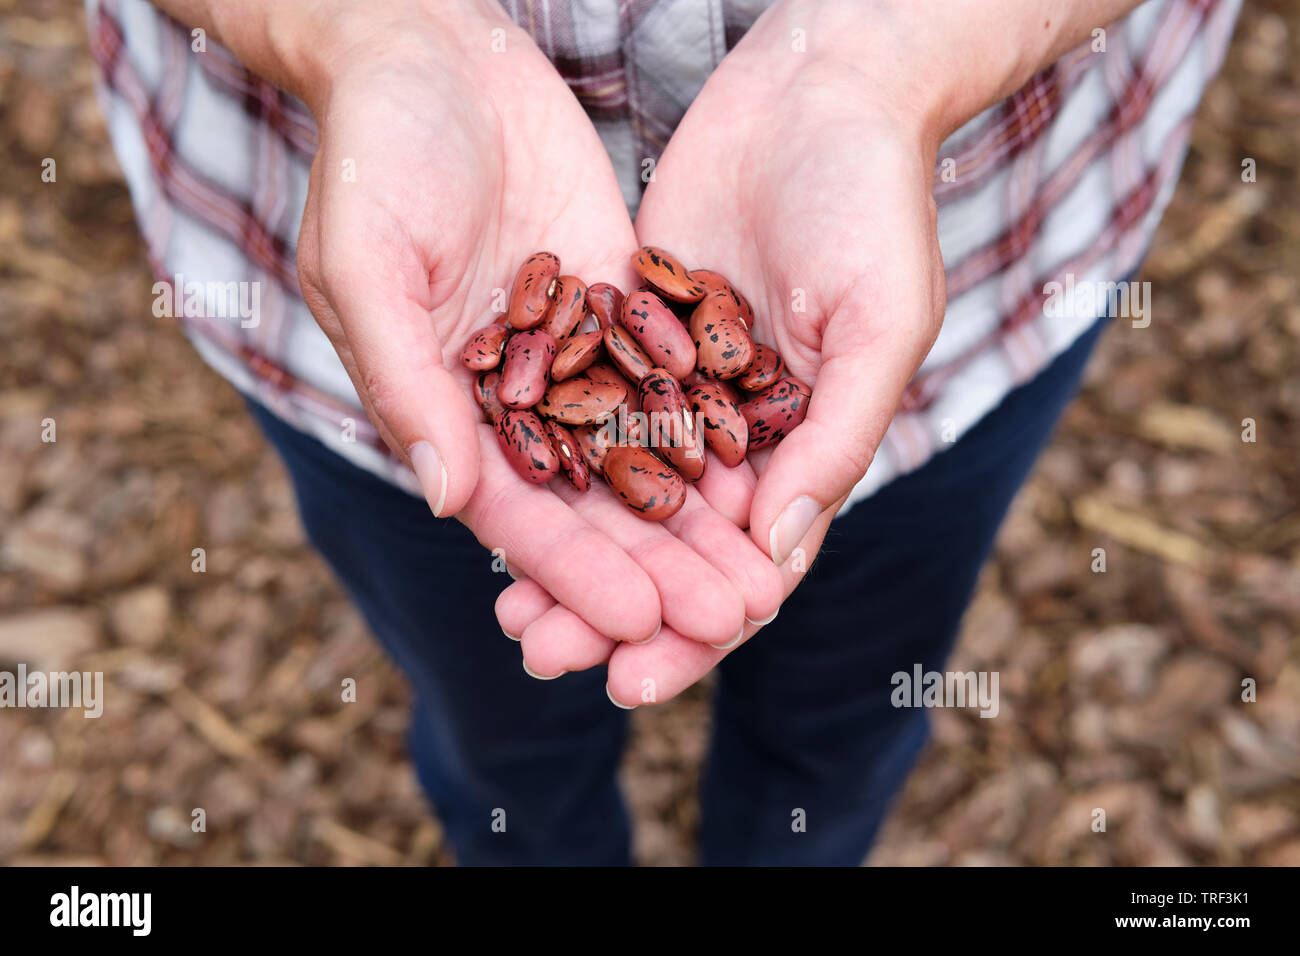 Caucasian woman holding Runner Bean 'Enorma' plant seeds in open hands. Stock Photo